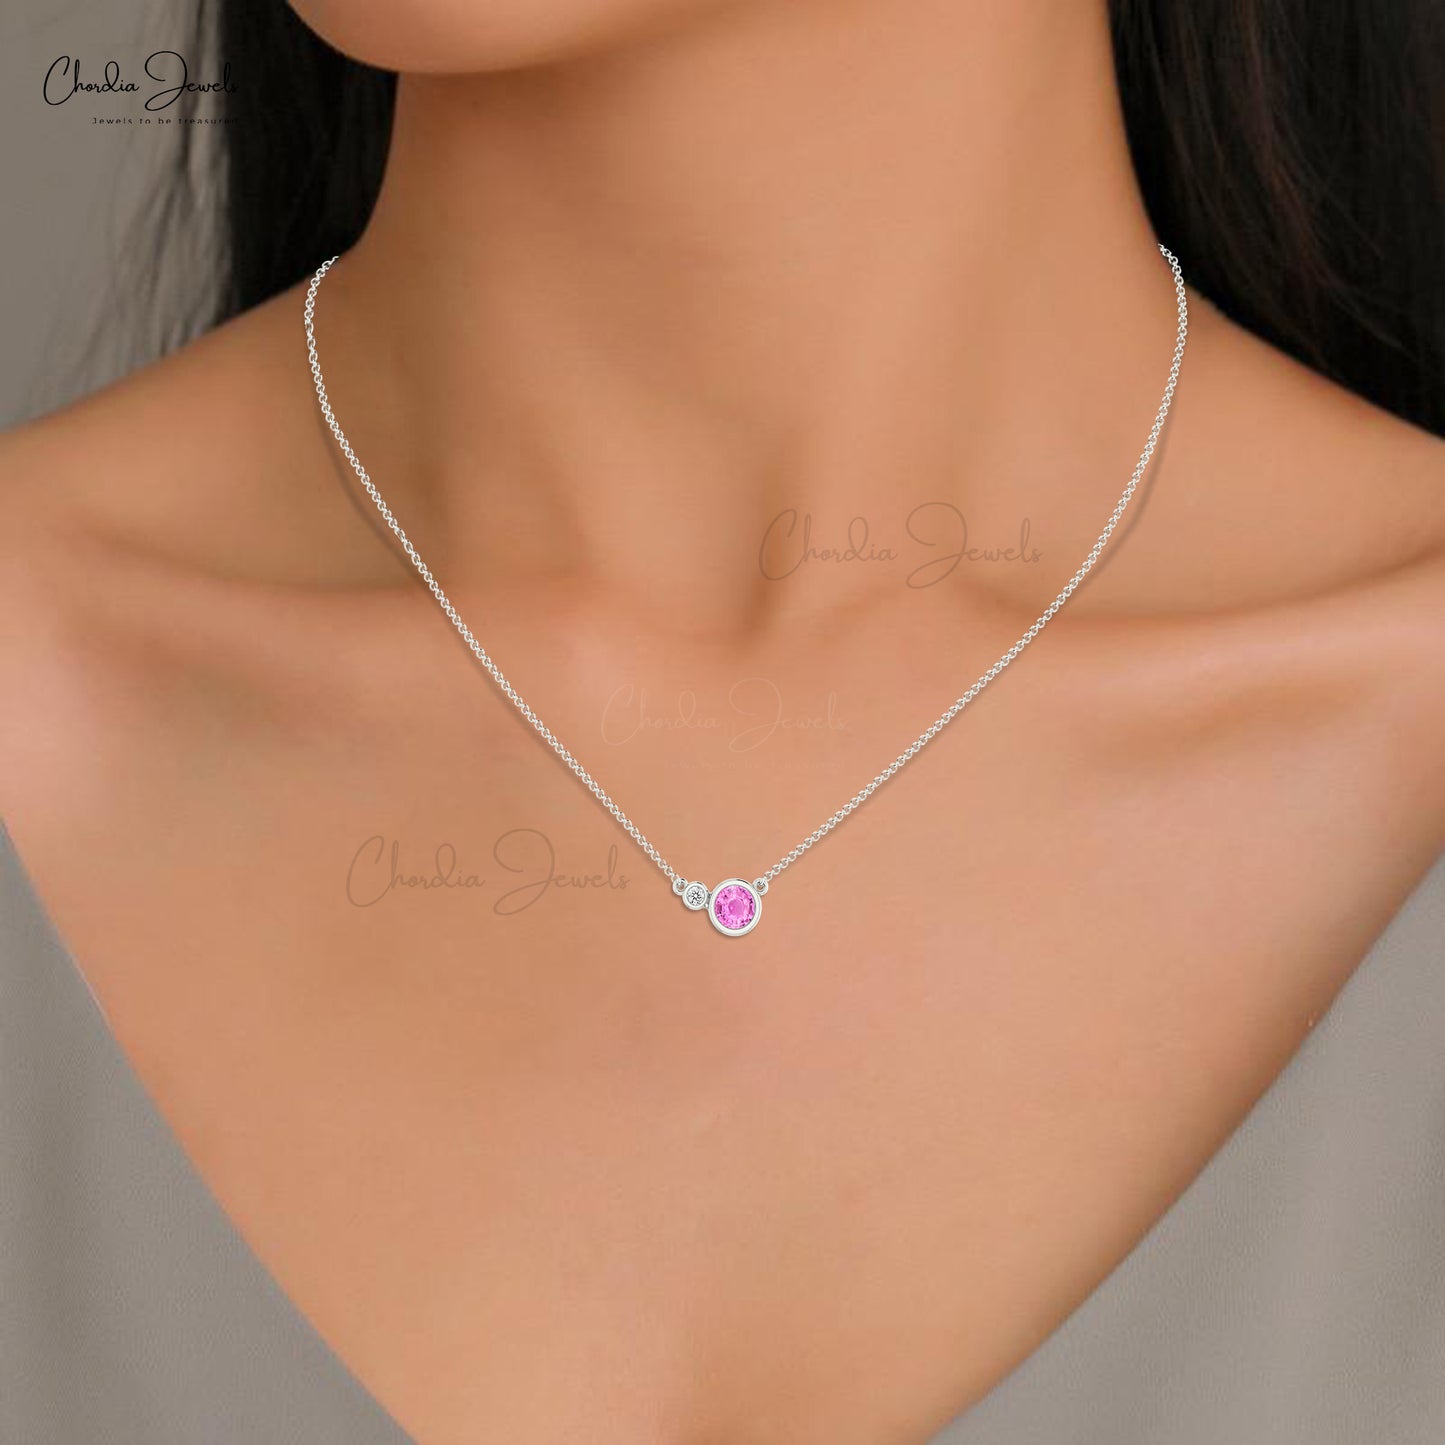 5mm Round Gemstone Necklace, 14k Solid Gold Diamond Necklace, Natural Pink Sapphire Necklace, September Birthstone Necklace Gift for Her